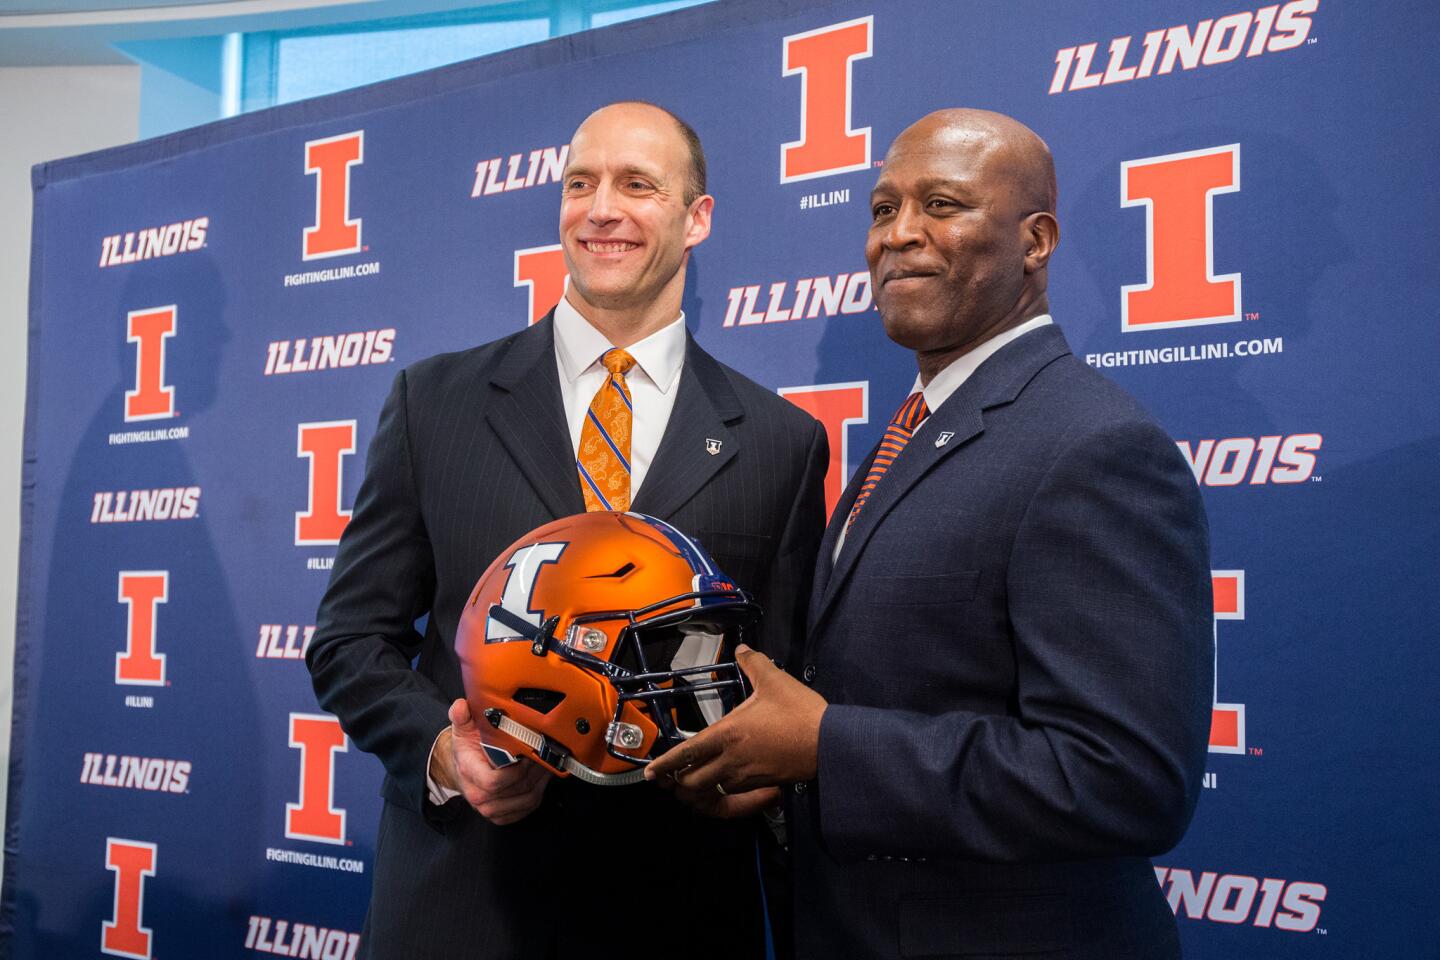 Lovie Smith is introduced by athletic director Josh Whitman as Illini head coach at the Bielfeldt Athletics Administration Building in Champaign on Monday, March 7, 2016.